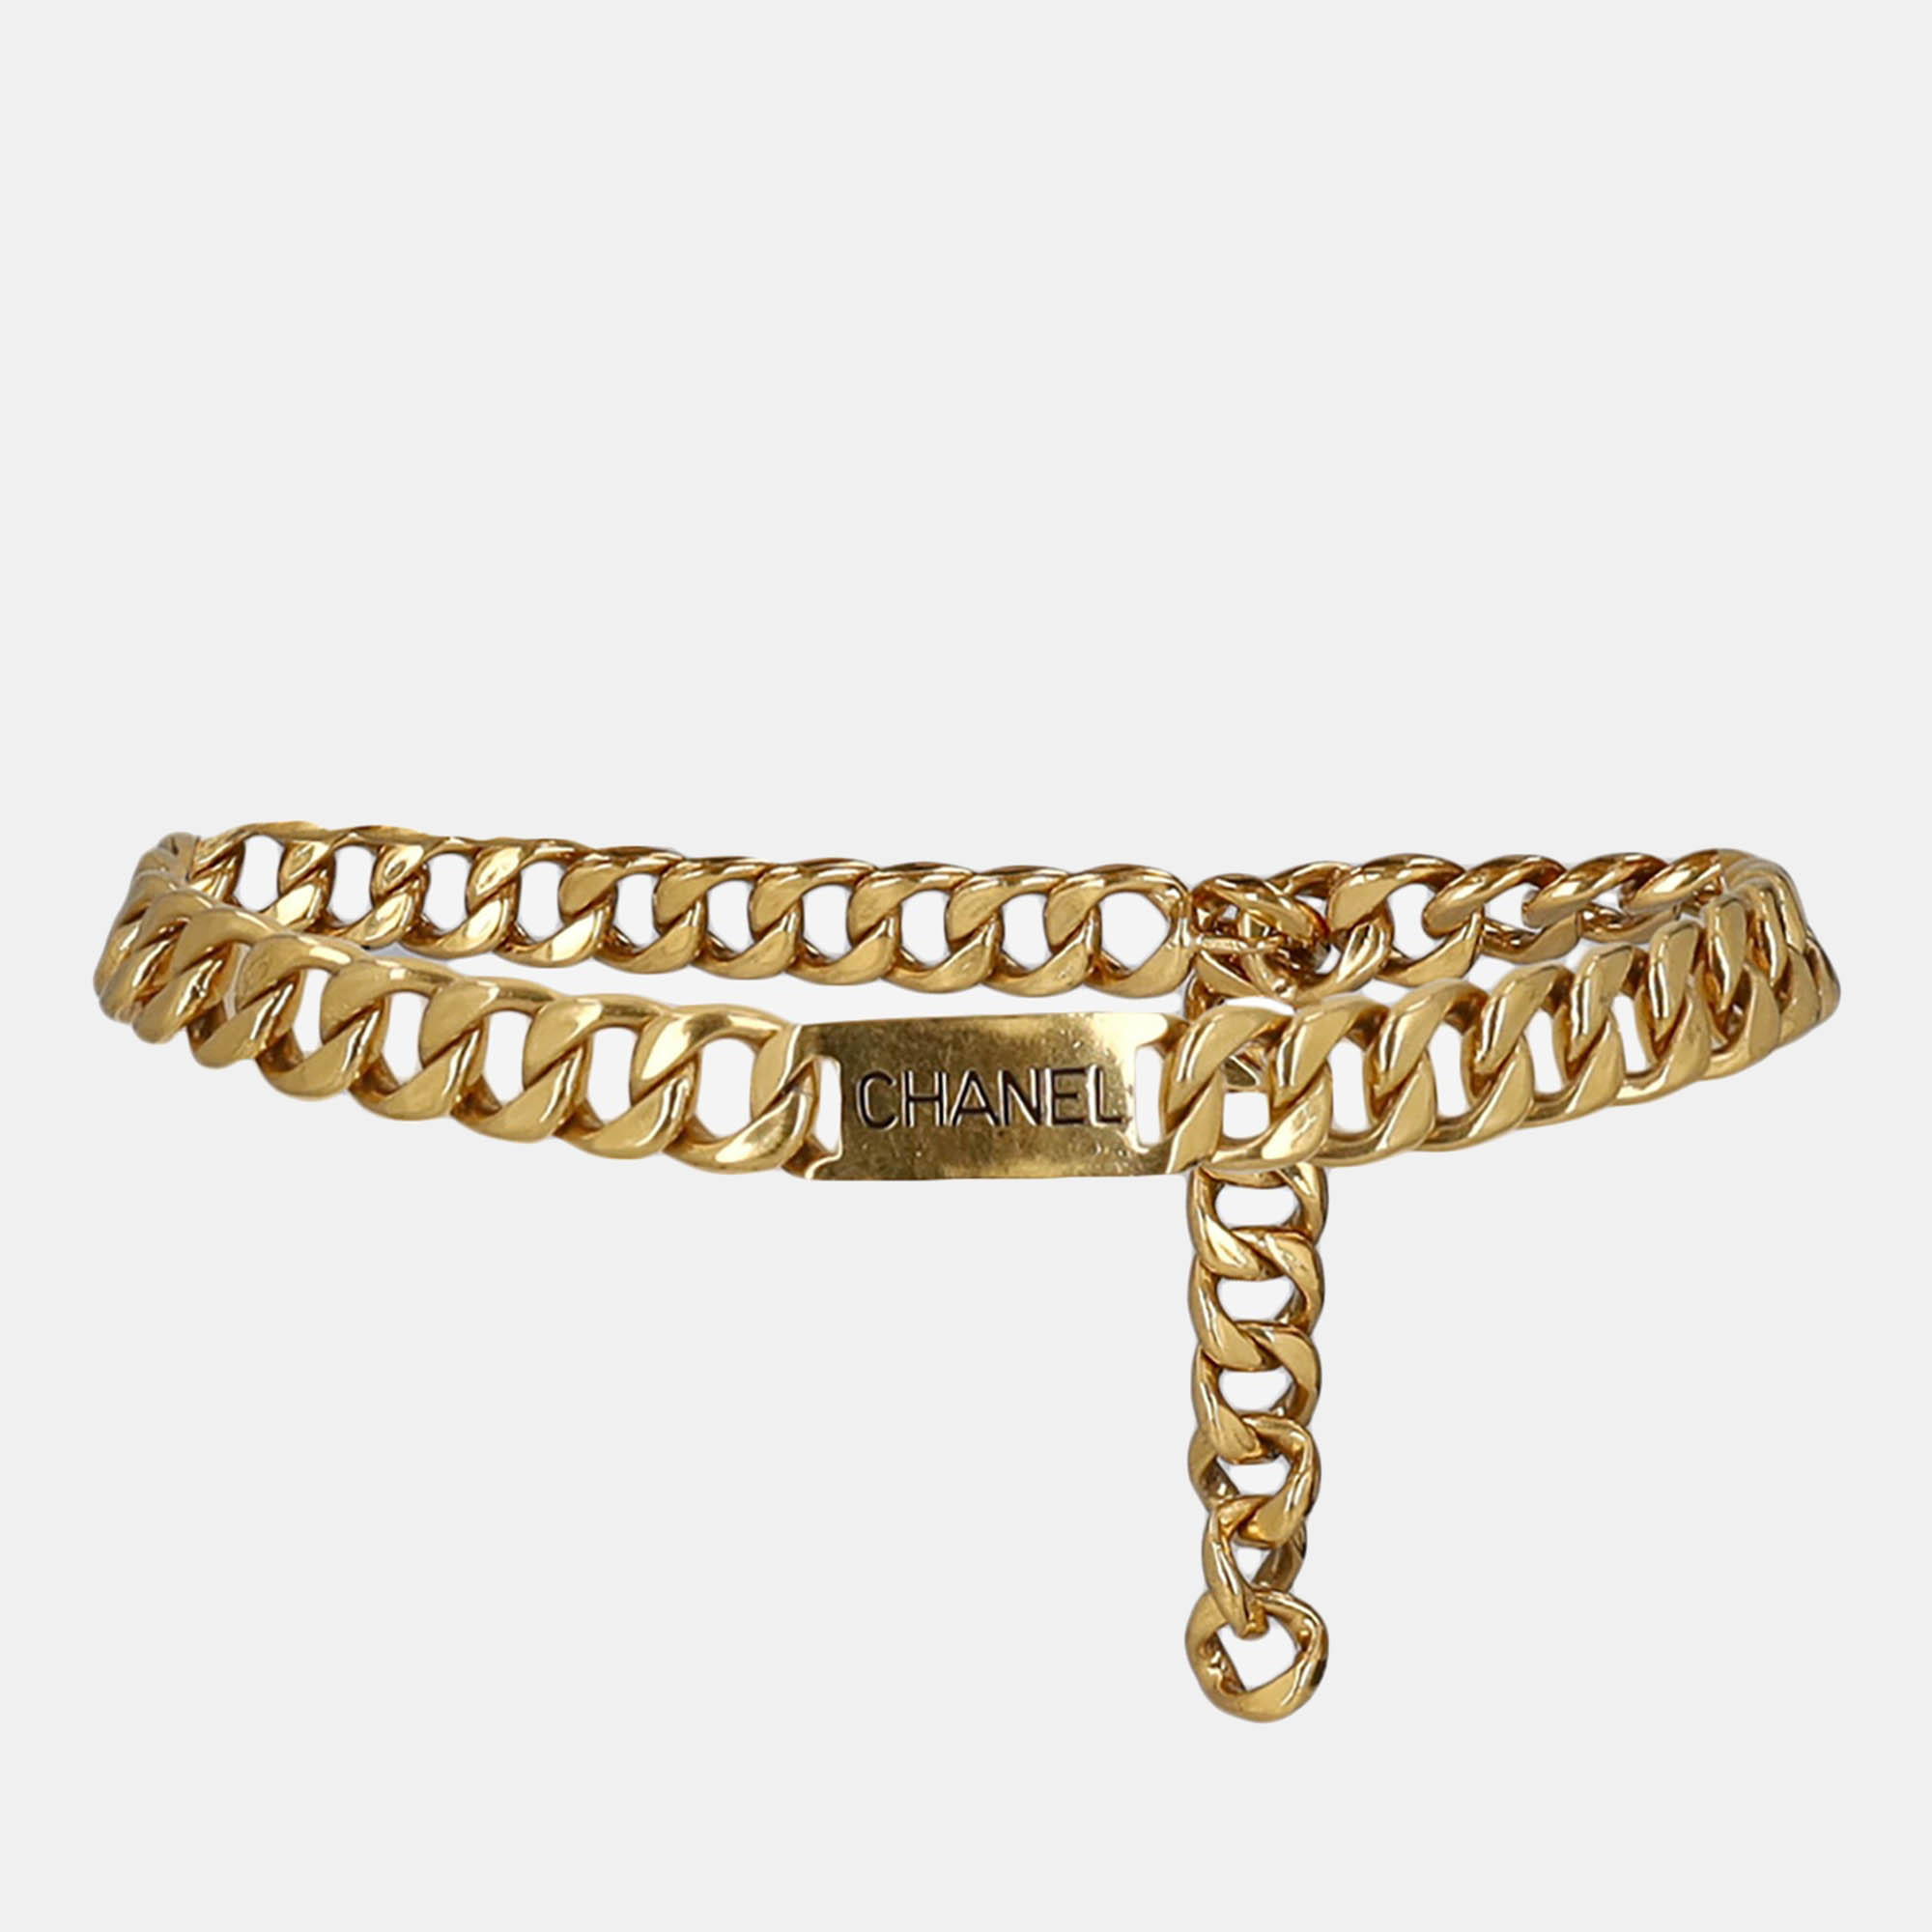 Chanel  Women's Metal High-Waisted Belt - Gold - One Size